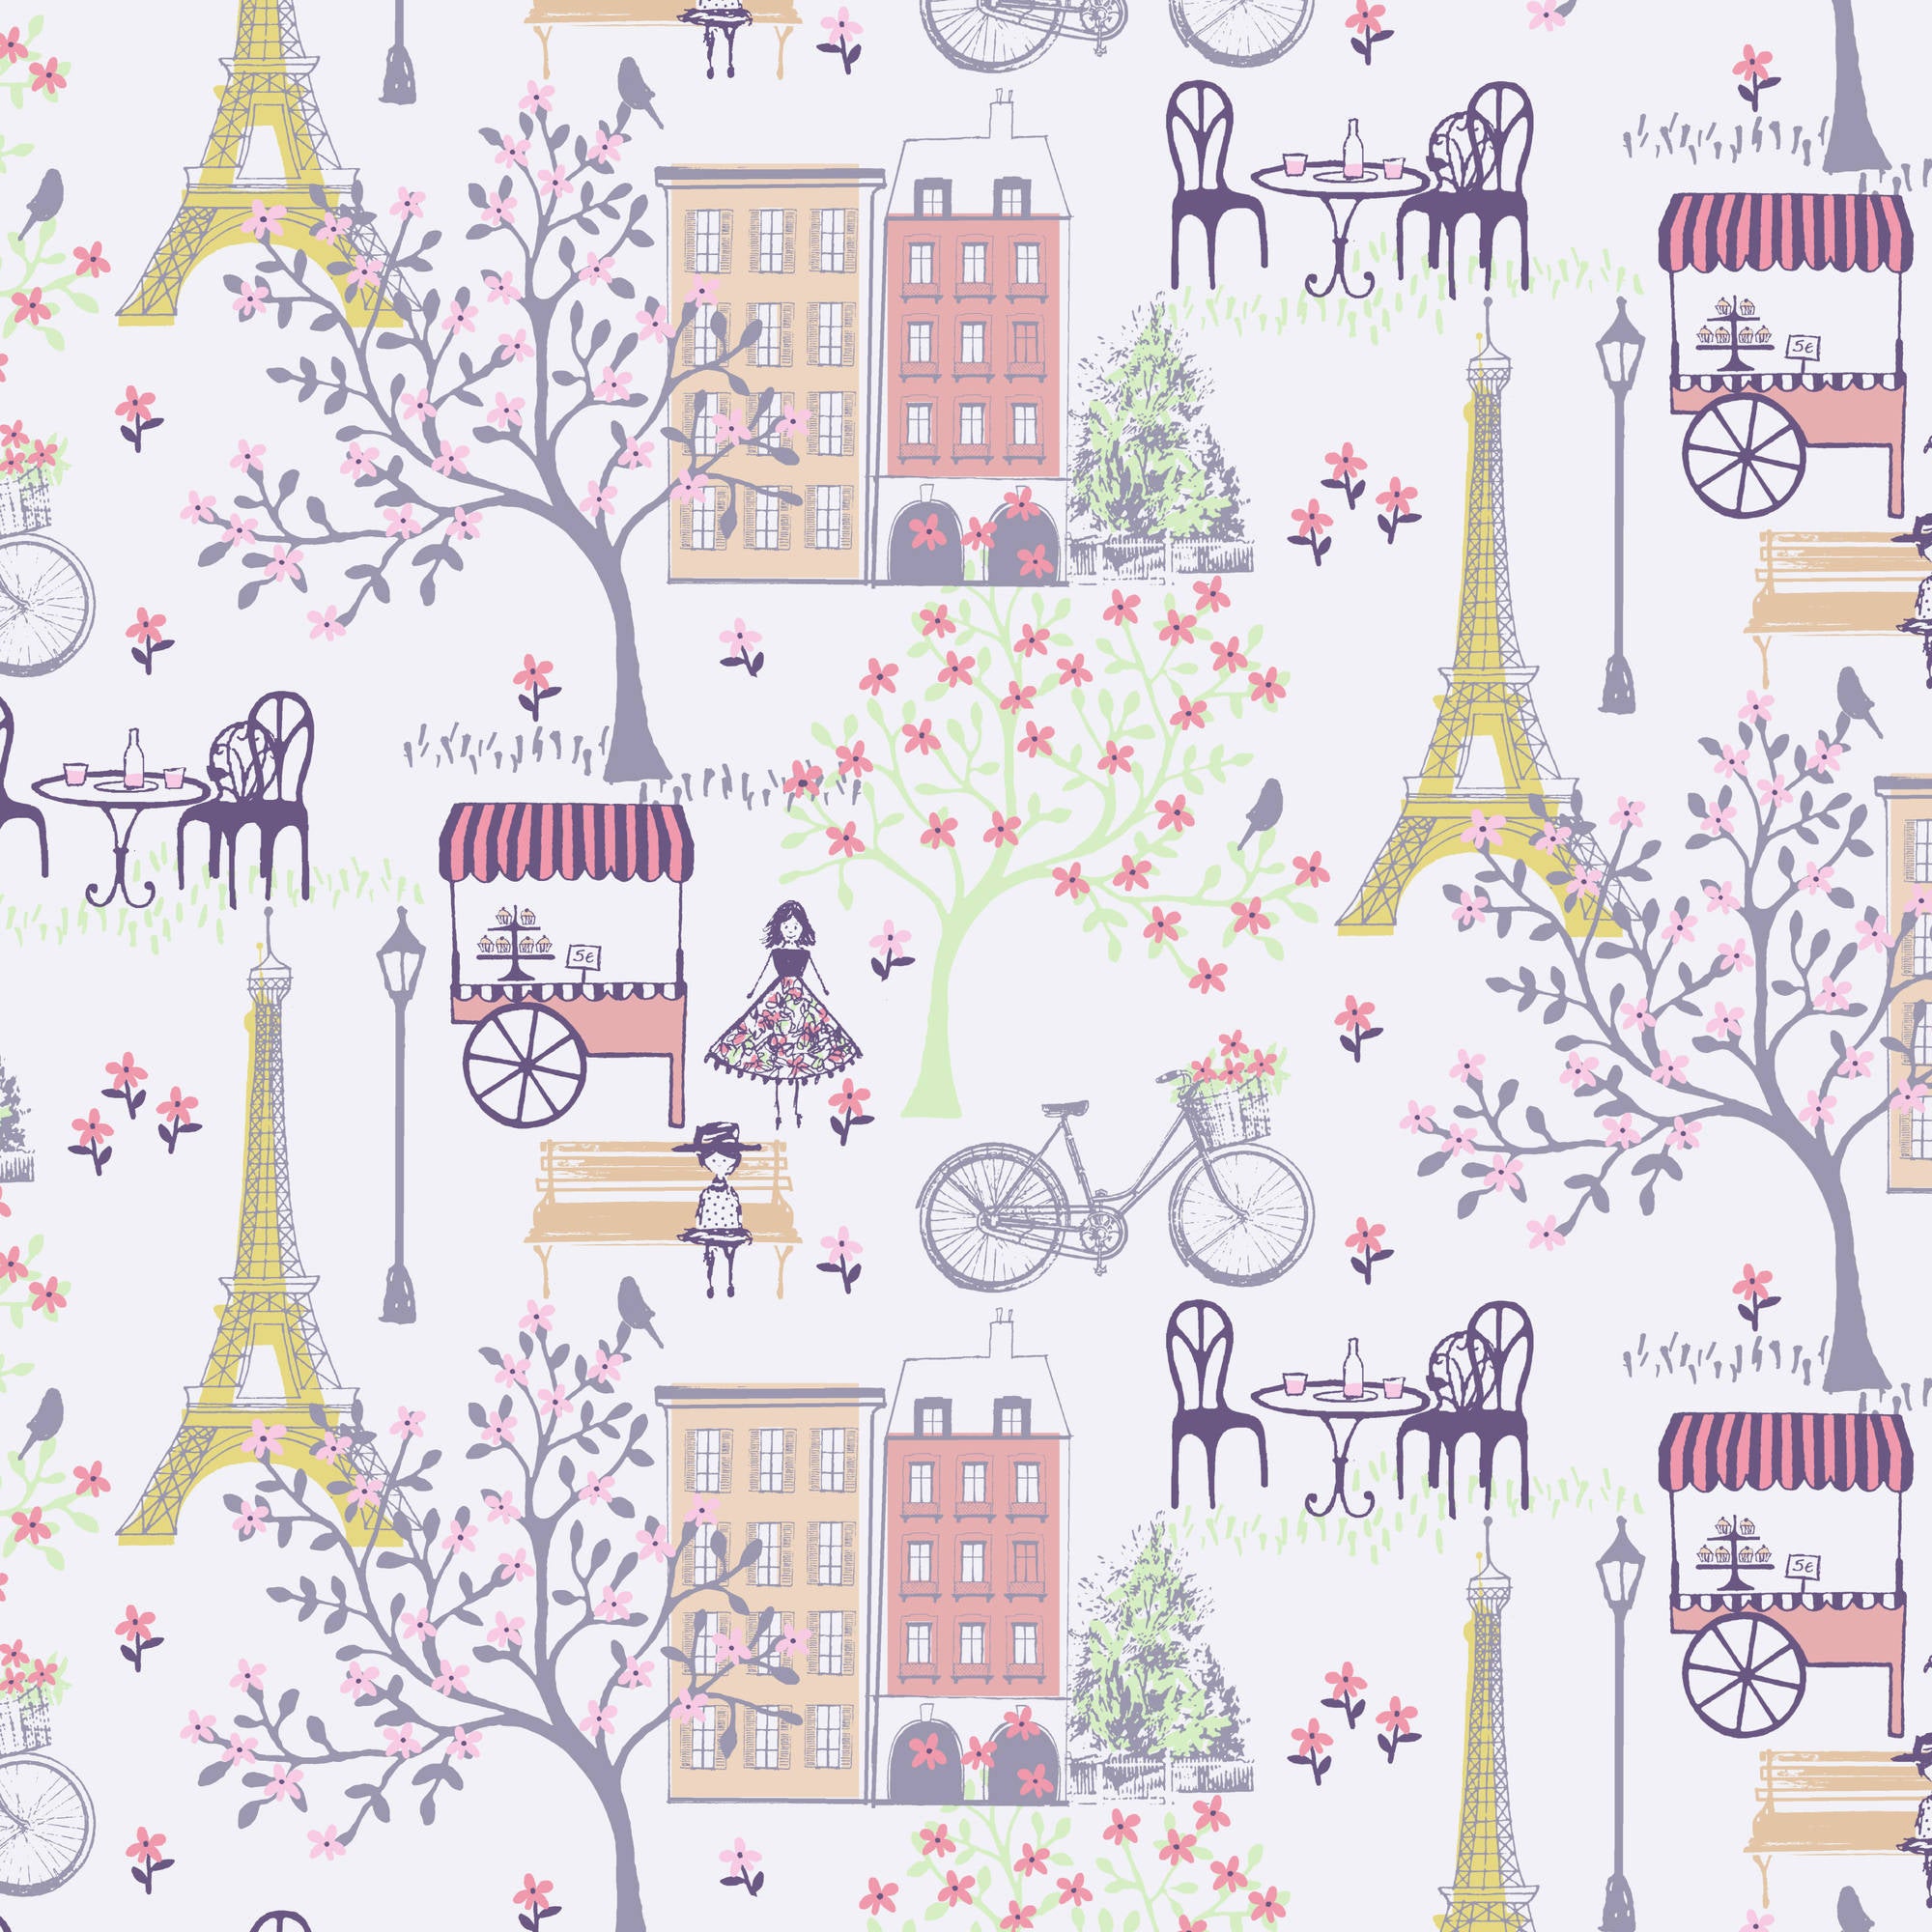 Waverly Inspirations Cotton 44" Paris Stroll Carnation Color Sewing Fabric by the Yard